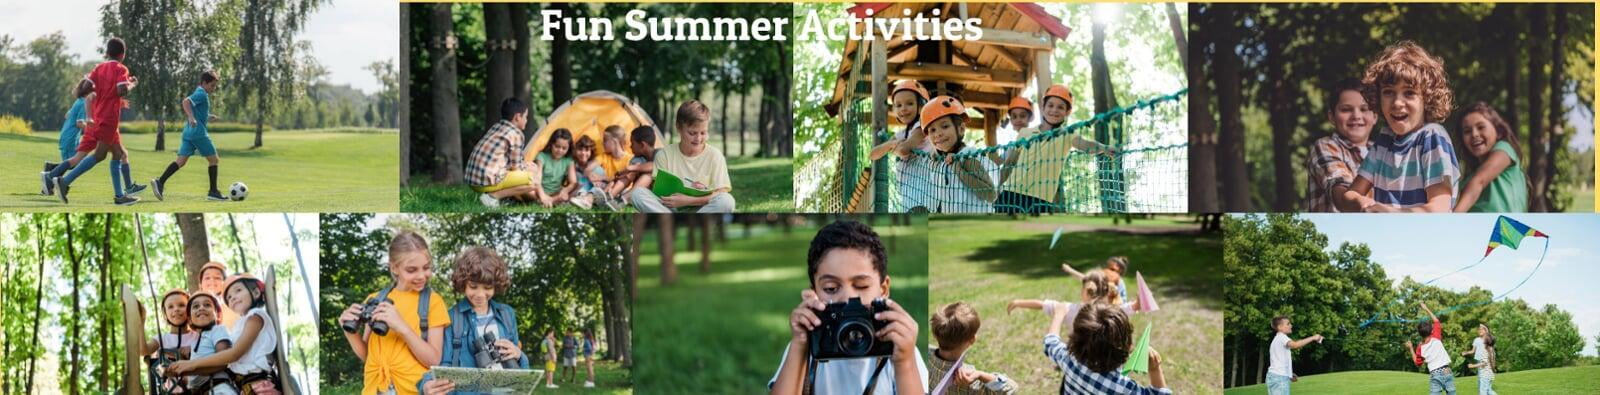 National Centre for Excellence - Summer Activities for Kids